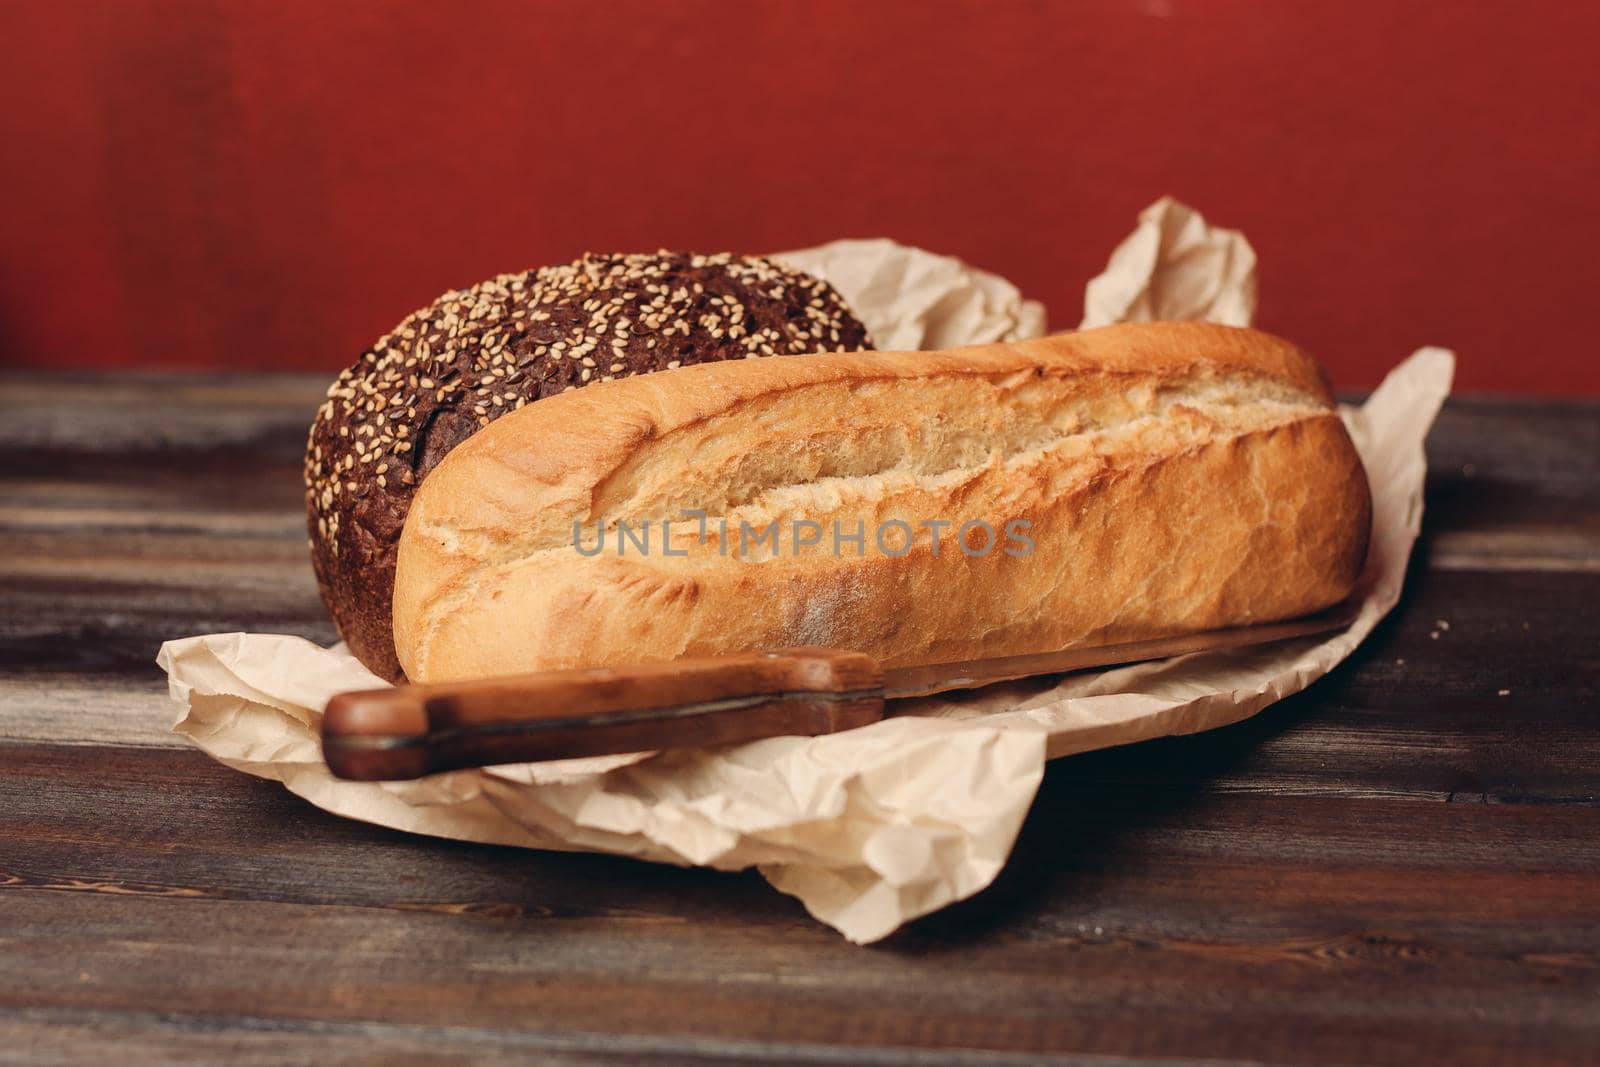 flour products rye bread on packaging and wooden table knife red background by SHOTPRIME